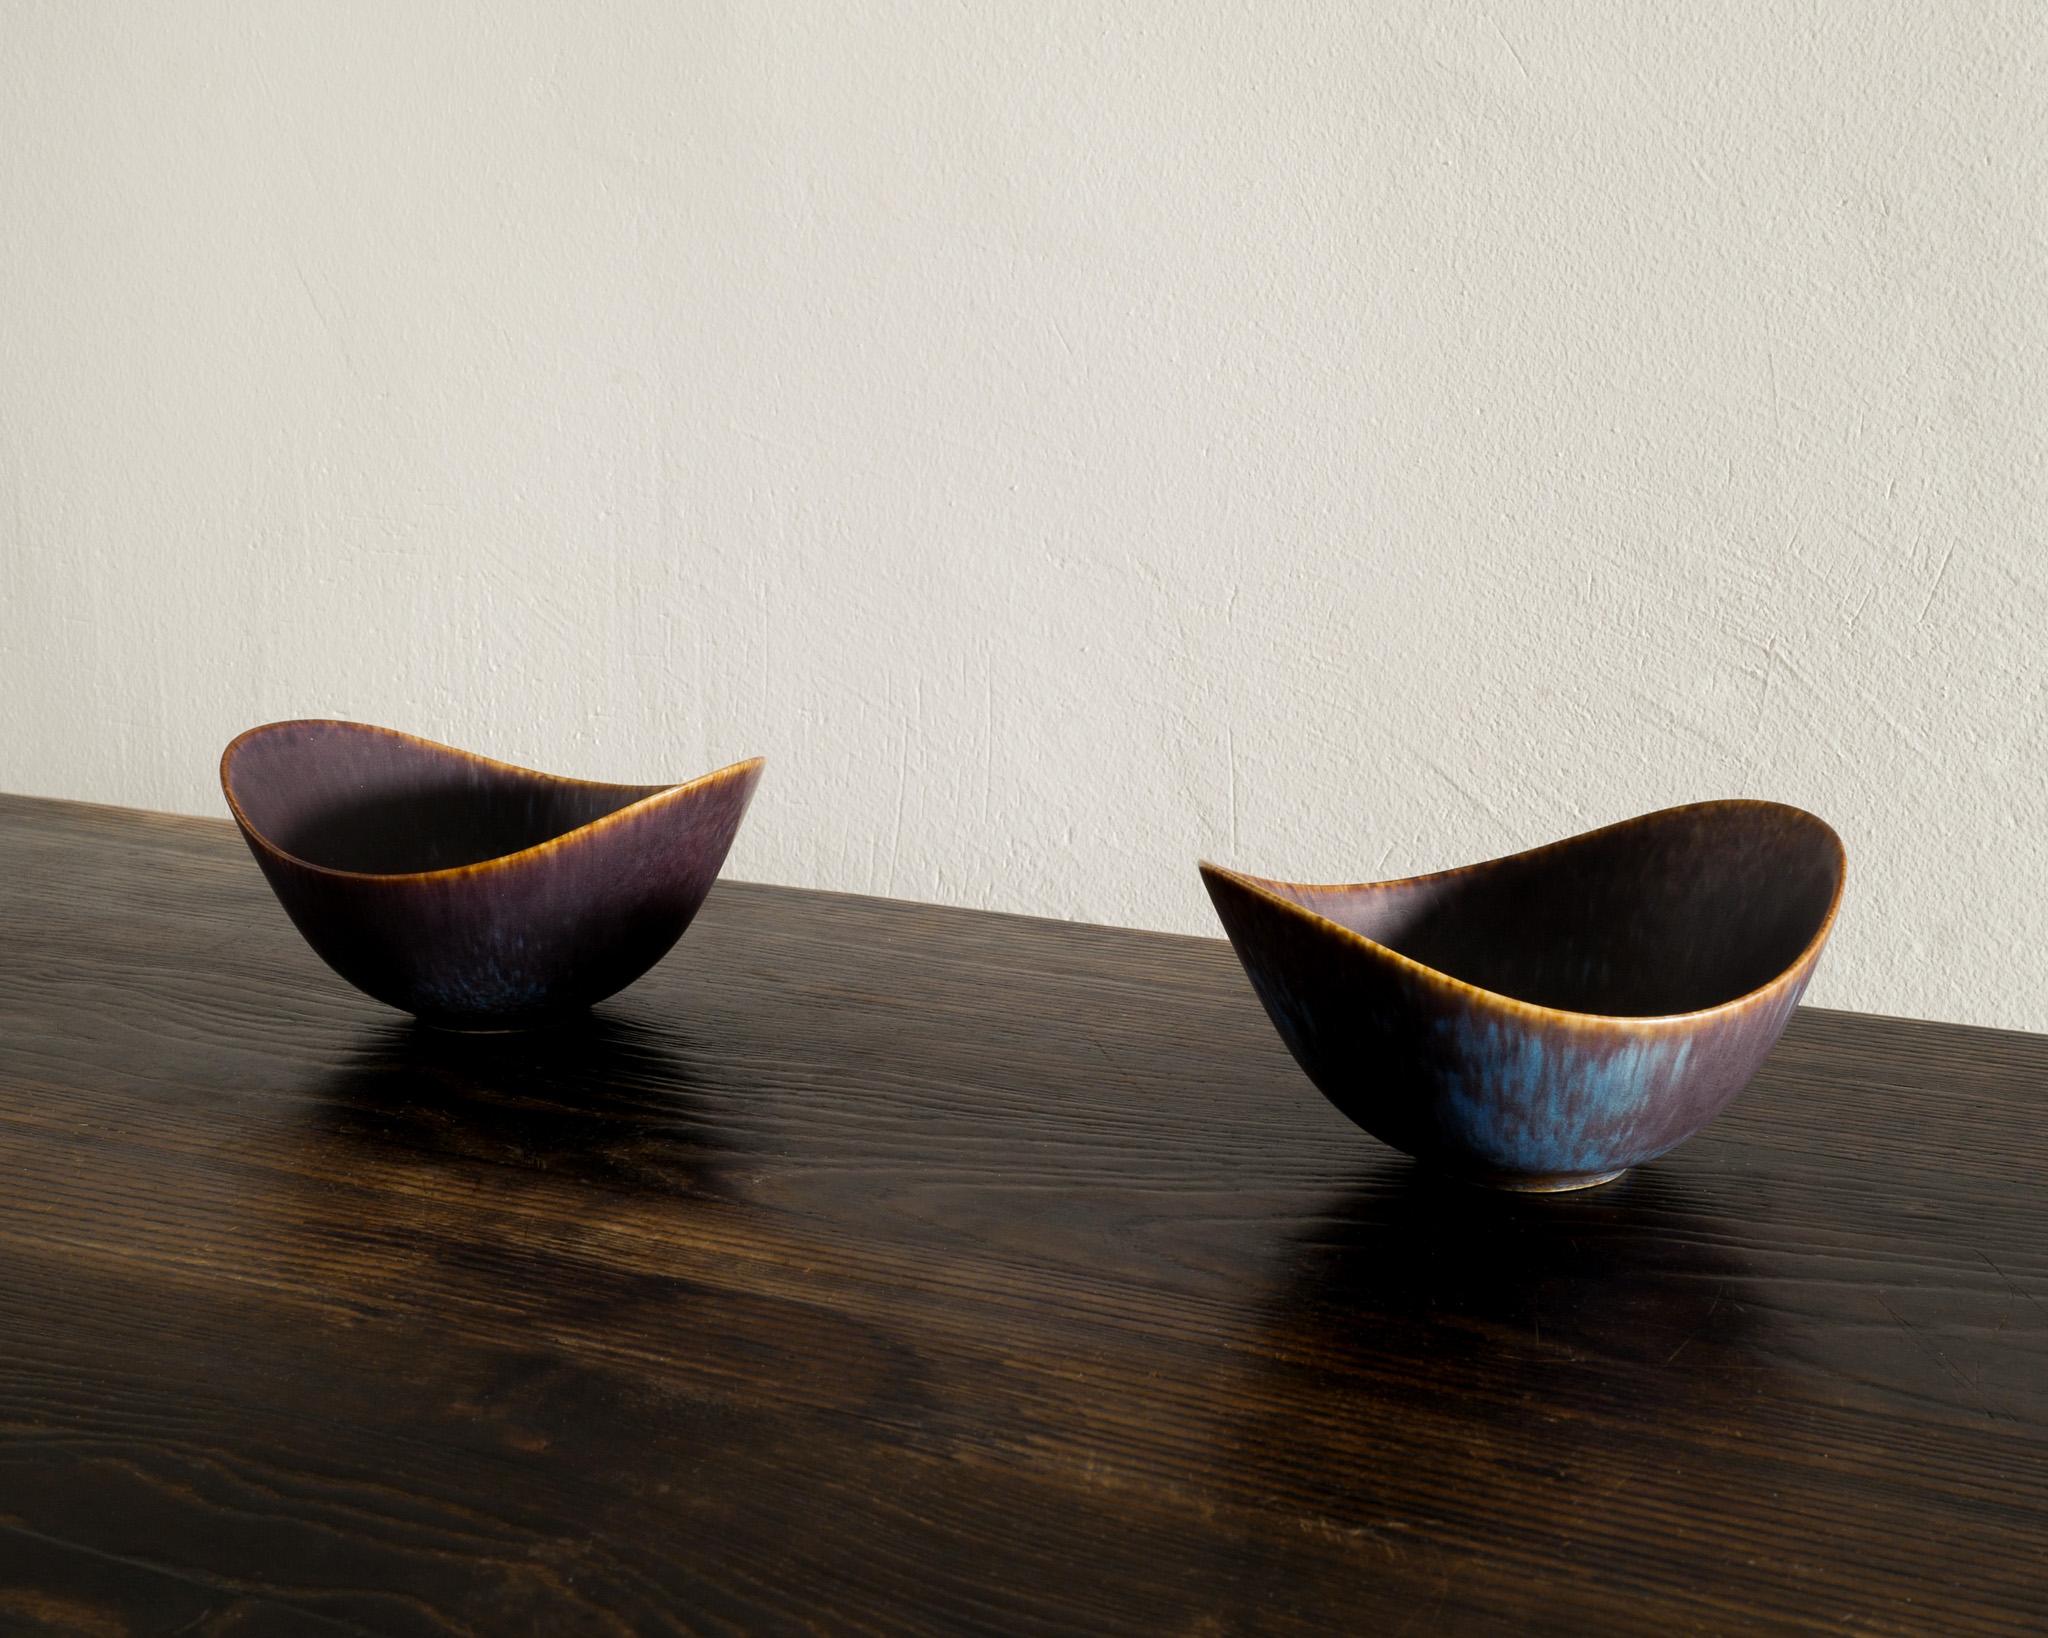 Scandinavian Modern Pair of Mid Century Ceramic Bowls by Gunnar Nylund for Rörstrand Sweden, 1950s For Sale